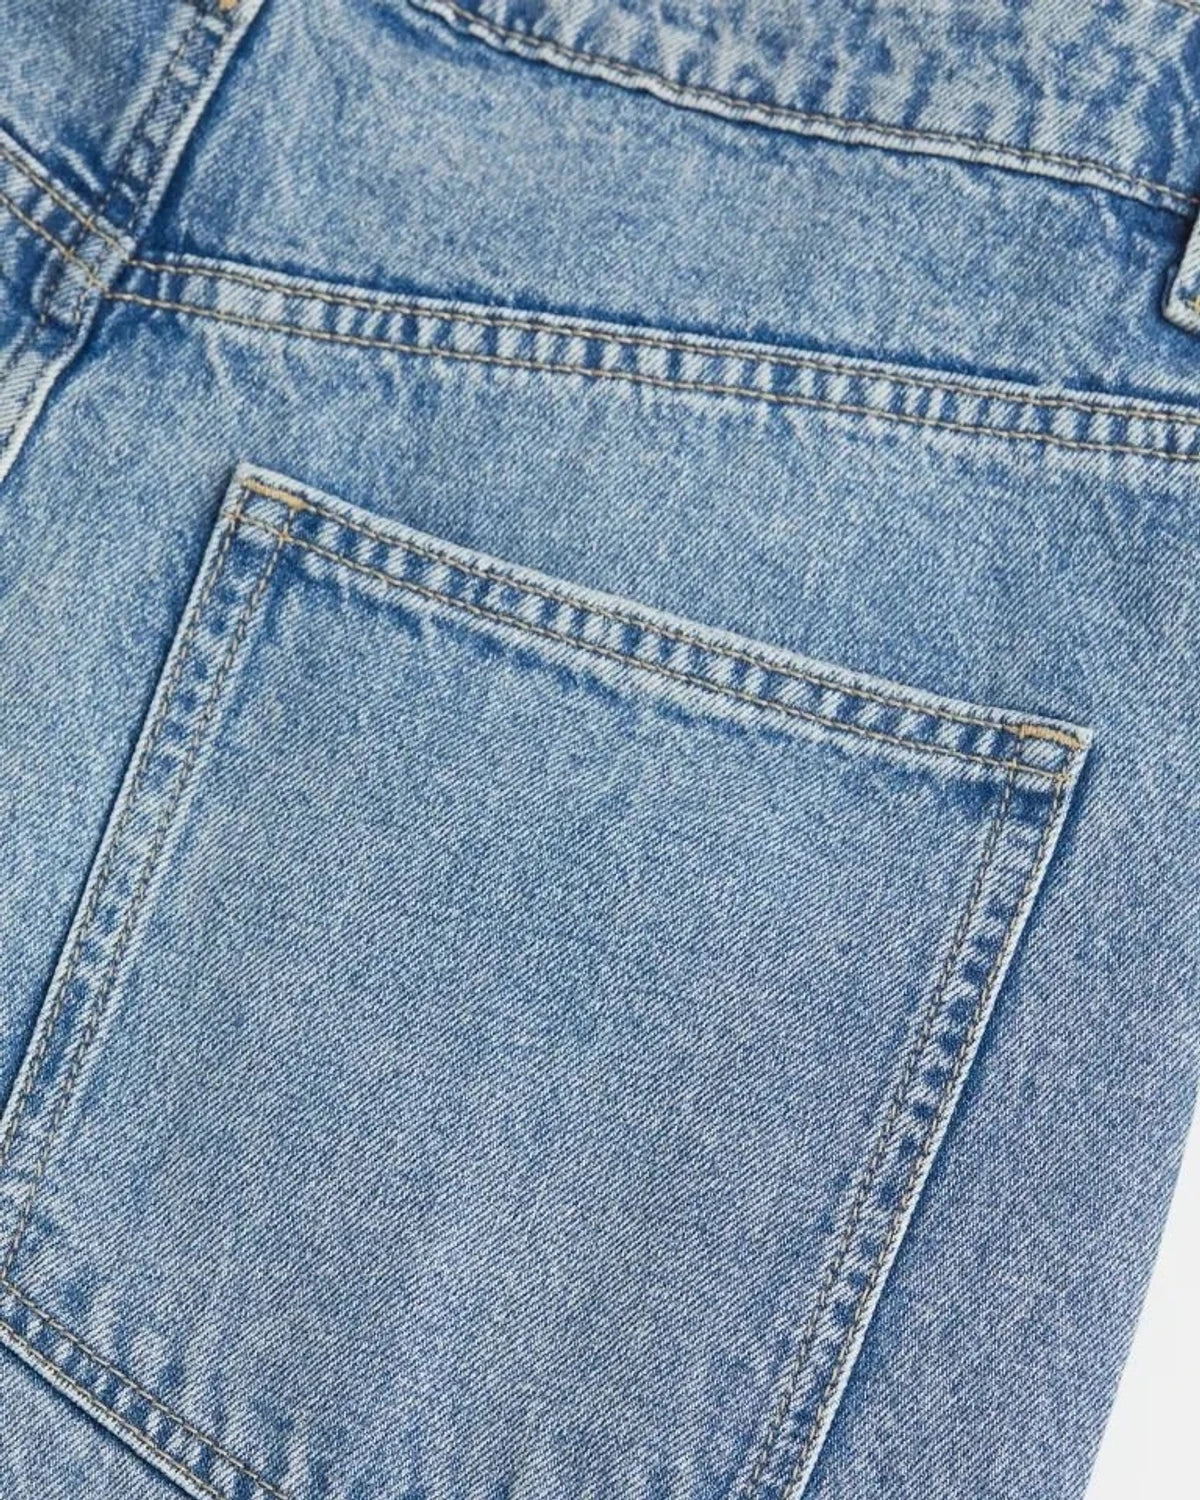 CARGO JEANS,baggy, bottomwear, cargos, denim, full length, high rise, high waist, icy blue, jeans, light blue, straight fit, washed jeans, wide leg, Length - Full length Waist - High-rise waist Fit - Baggy fit Color - Icy blue No. of Pockets - 6 Material - Denim Length - 43" Closure - Zip &amp; button Detail - Washed effect